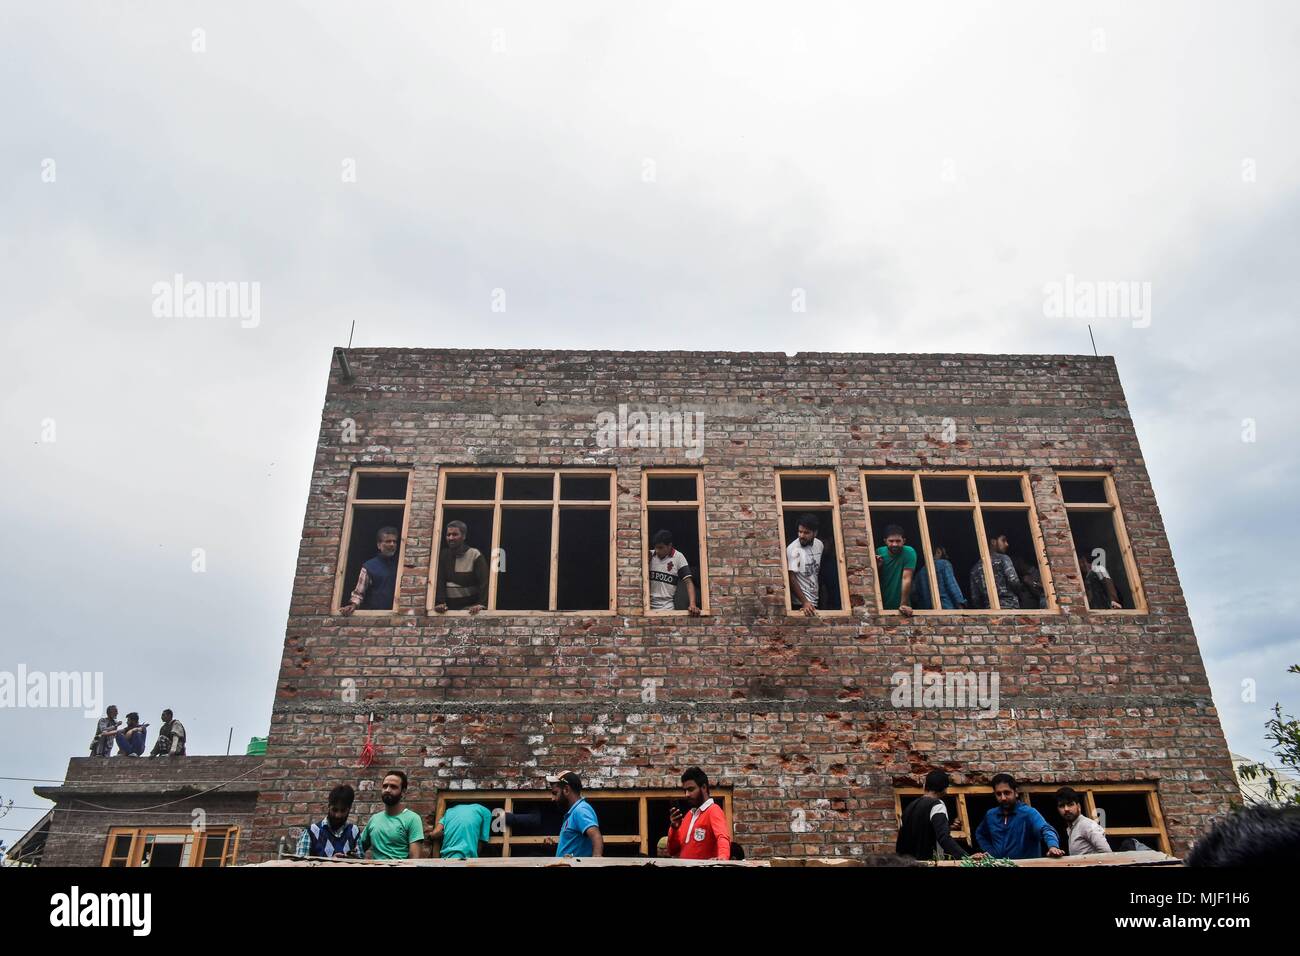 Kashmir, India, 5 May 2018.  Kashmiri residents can be seen inside the damaged hous militants were trapped during an encounter in Srinagar, Indian administered Kashmir. Three suspected militants and one civilian have been killed while three Indian paramilitary men sustained injuries in a gun battle in Srinagar, the summer capital of Indian administered Kashmir. The encounter started after government forces cordoned off a Chattabal area following the presence of militants in the area, officials said.  the militants were bel Credit: ZUMA Press, Inc./Alamy Live News Stock Photo